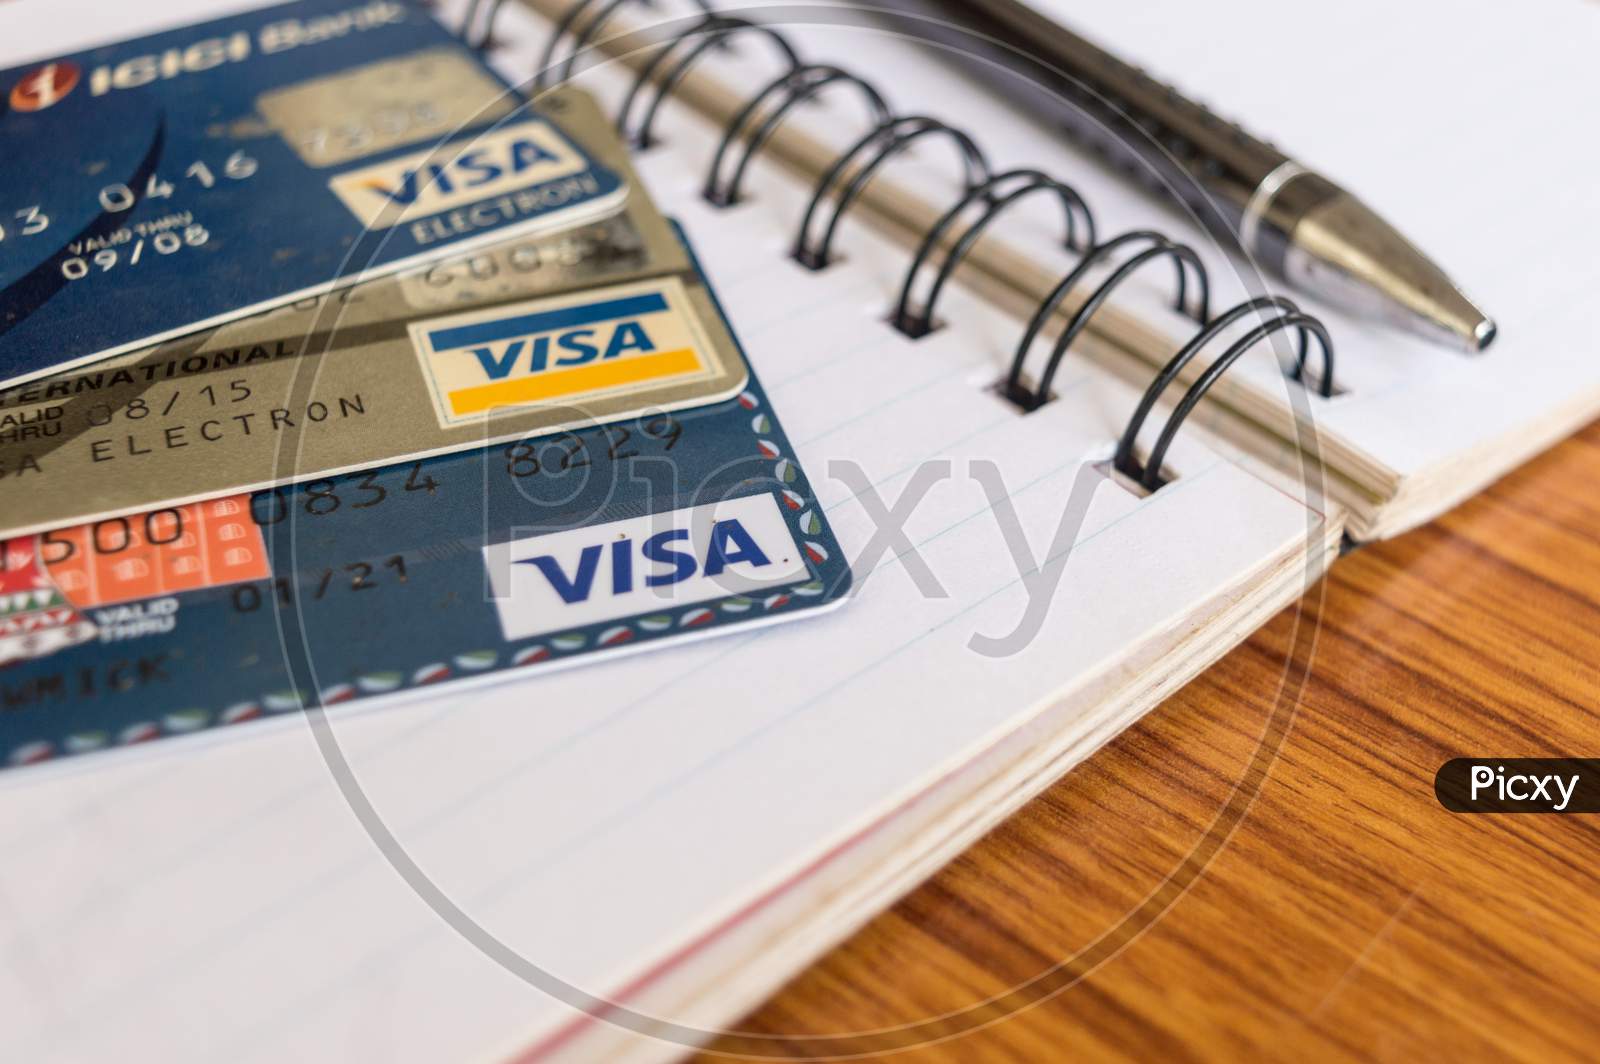 Goa India, 1 May 2019 - Close Shot Of Pile Of Visa Brand Credit Card, A Pen And Blank Application Form Paper Filling Document On Table. Shopping Online Or Pay Payment Business Concept. Shallow Focus.